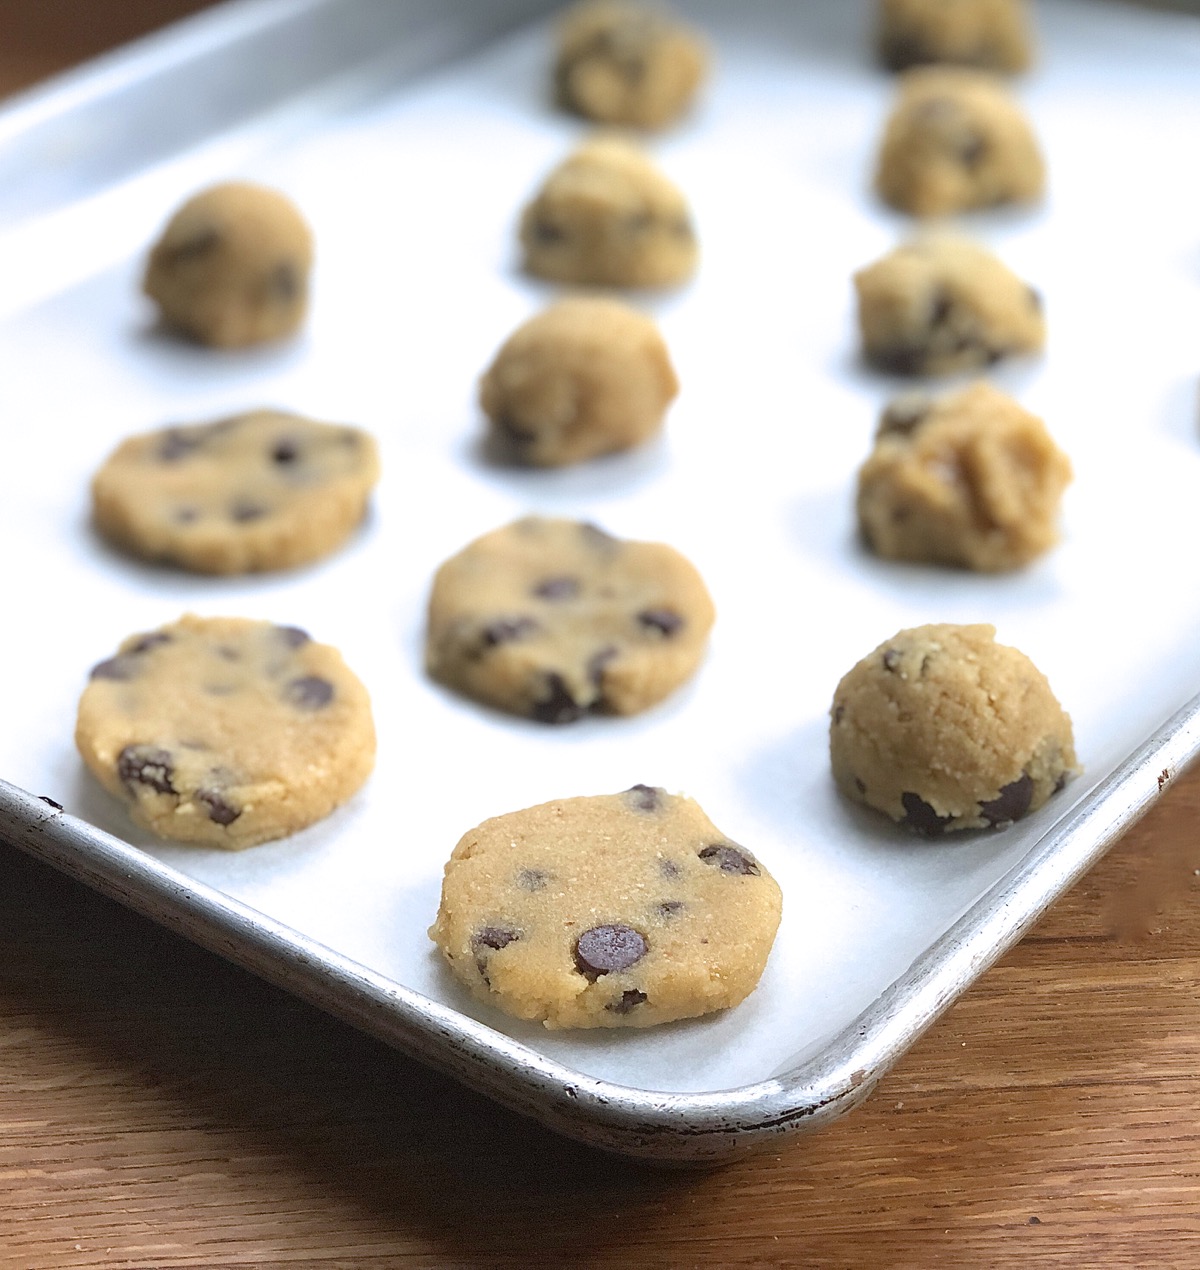 Dough for Gluten-Free Almond Flour Chocolate Chip Cookies scooped in balls onto a baking sheet and gently flattened.